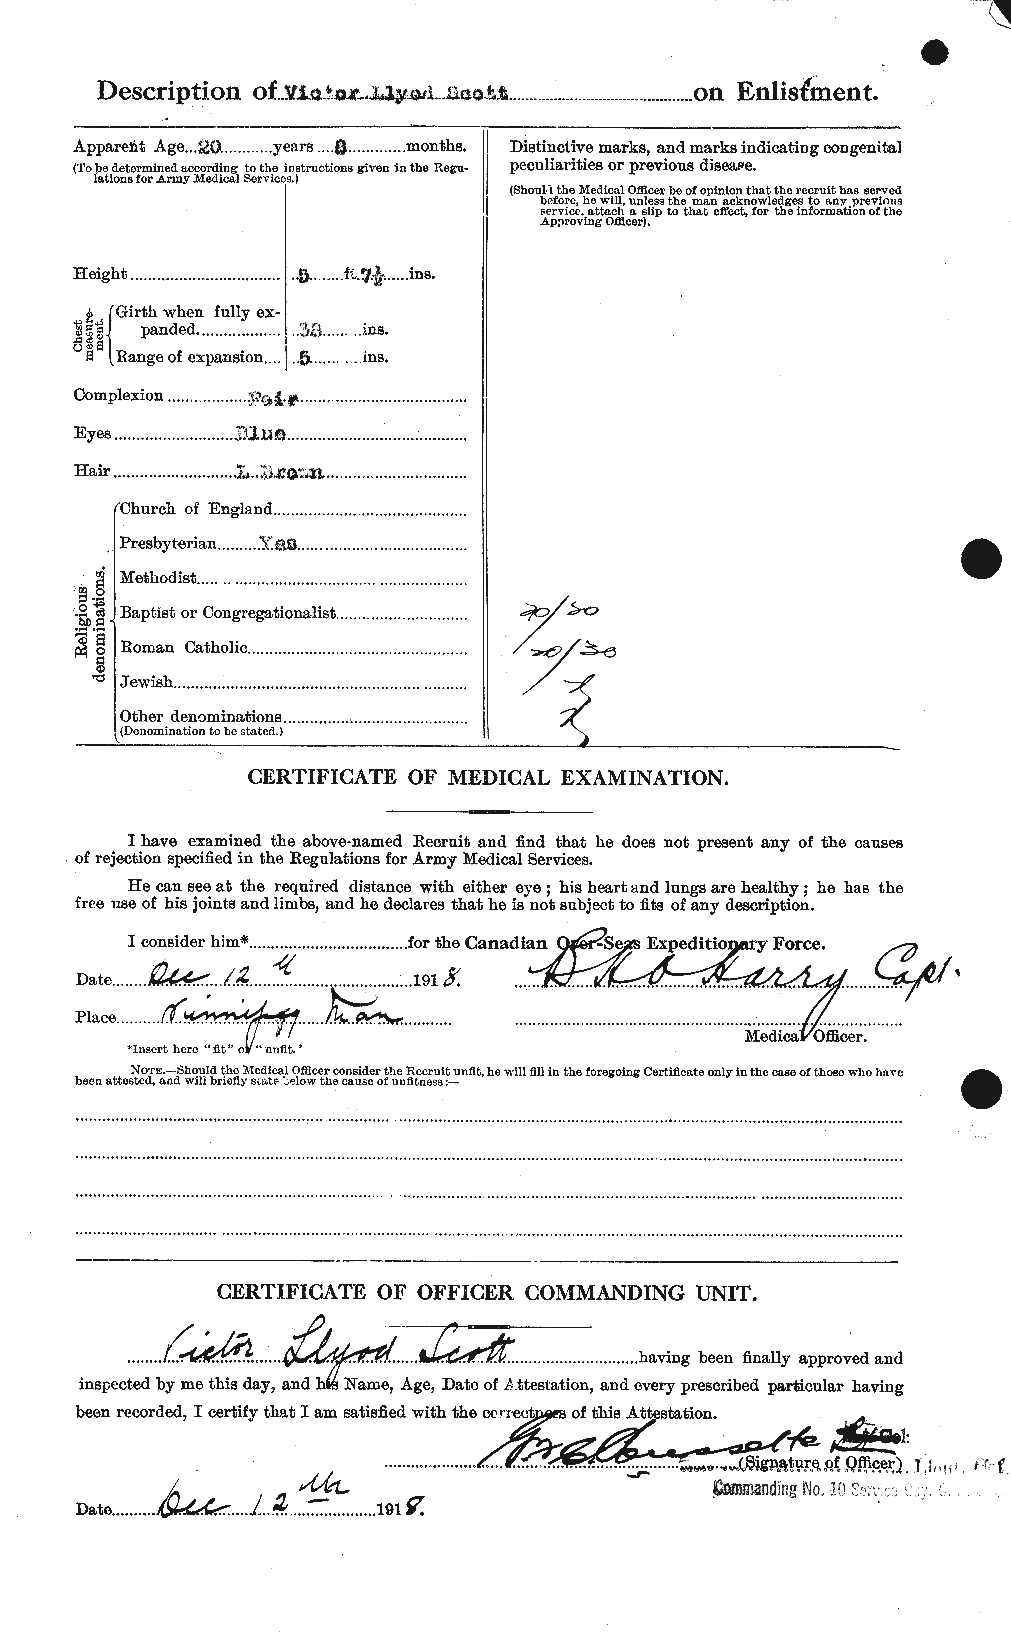 Personnel Records of the First World War - CEF 088200b